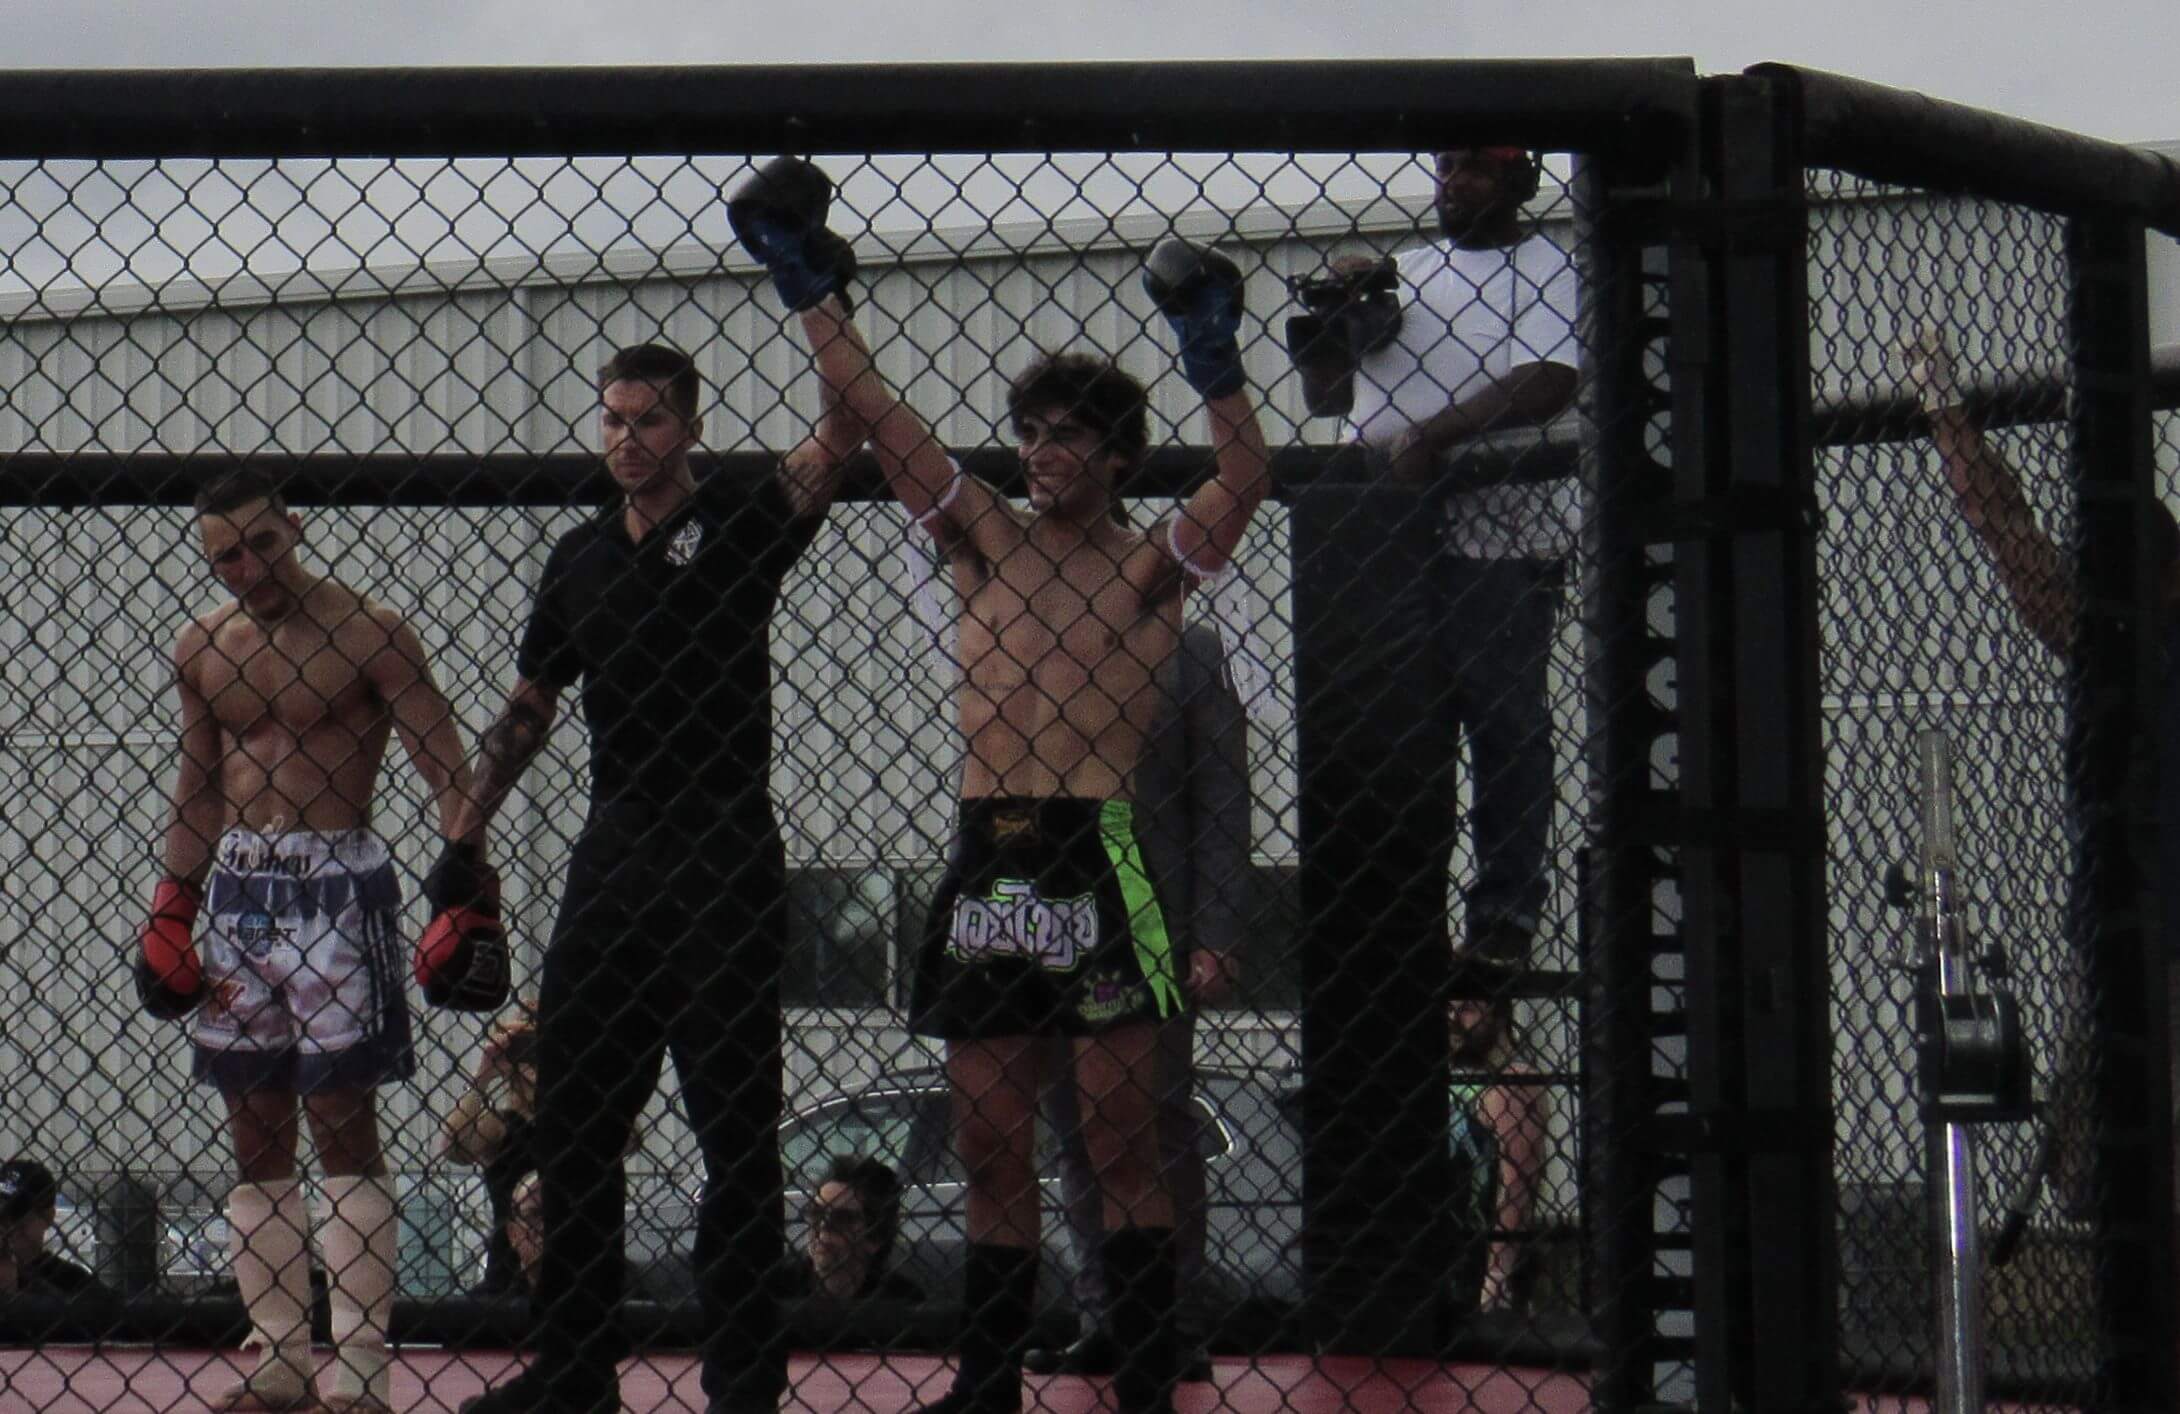 Martial arts student in cage match